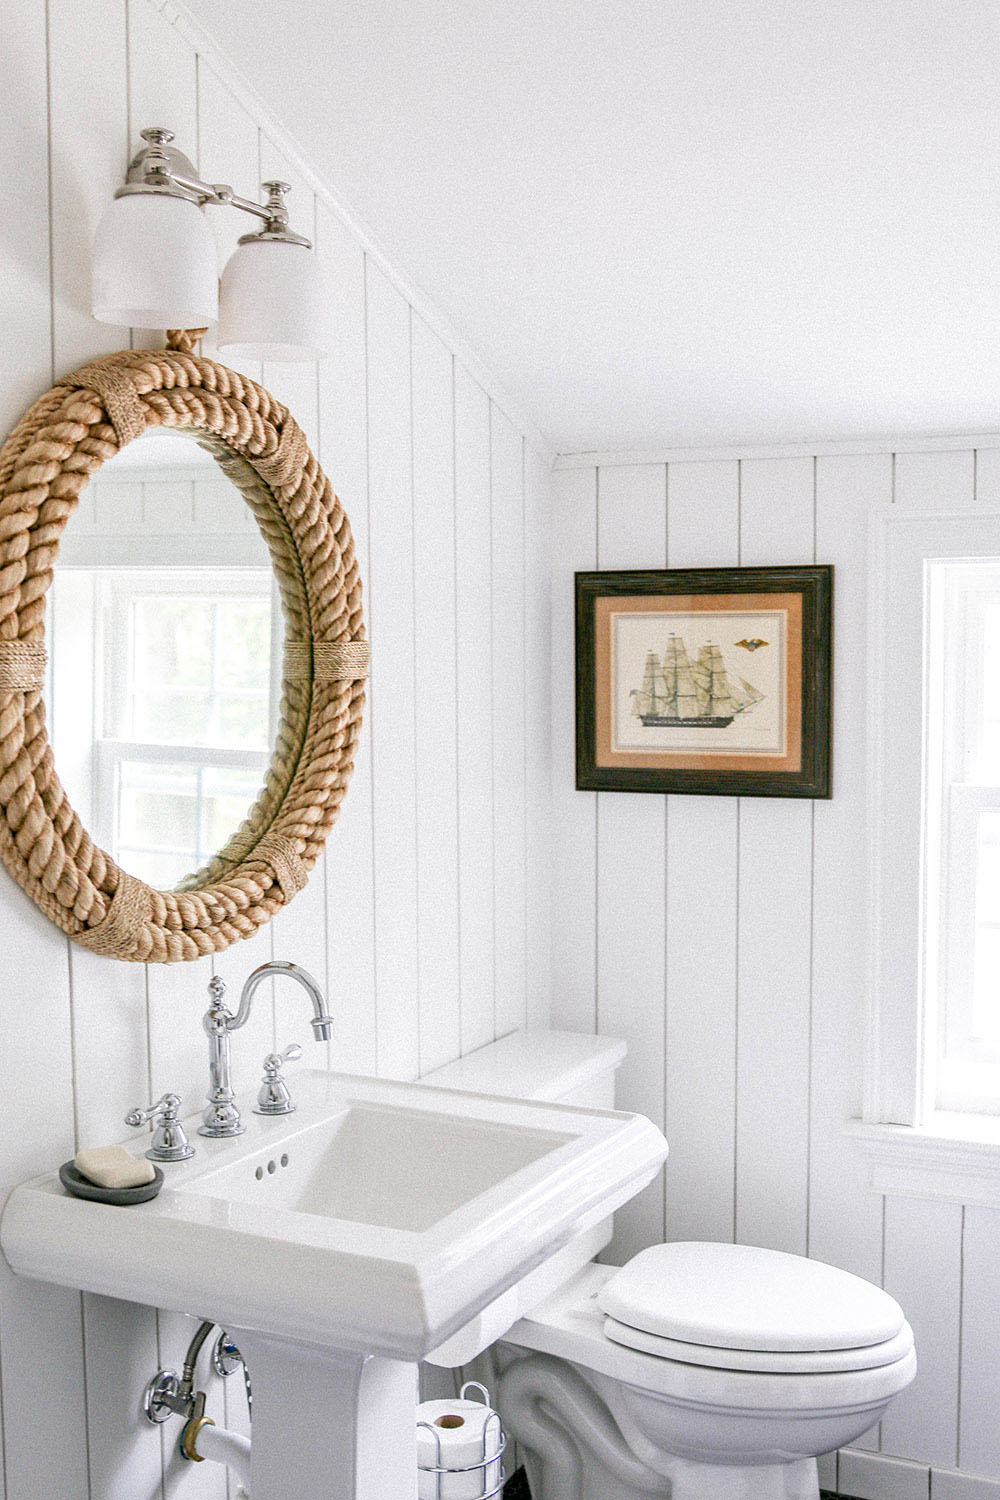 A renovated bathroom with a pedestal sink and white vertical shiplap walls.